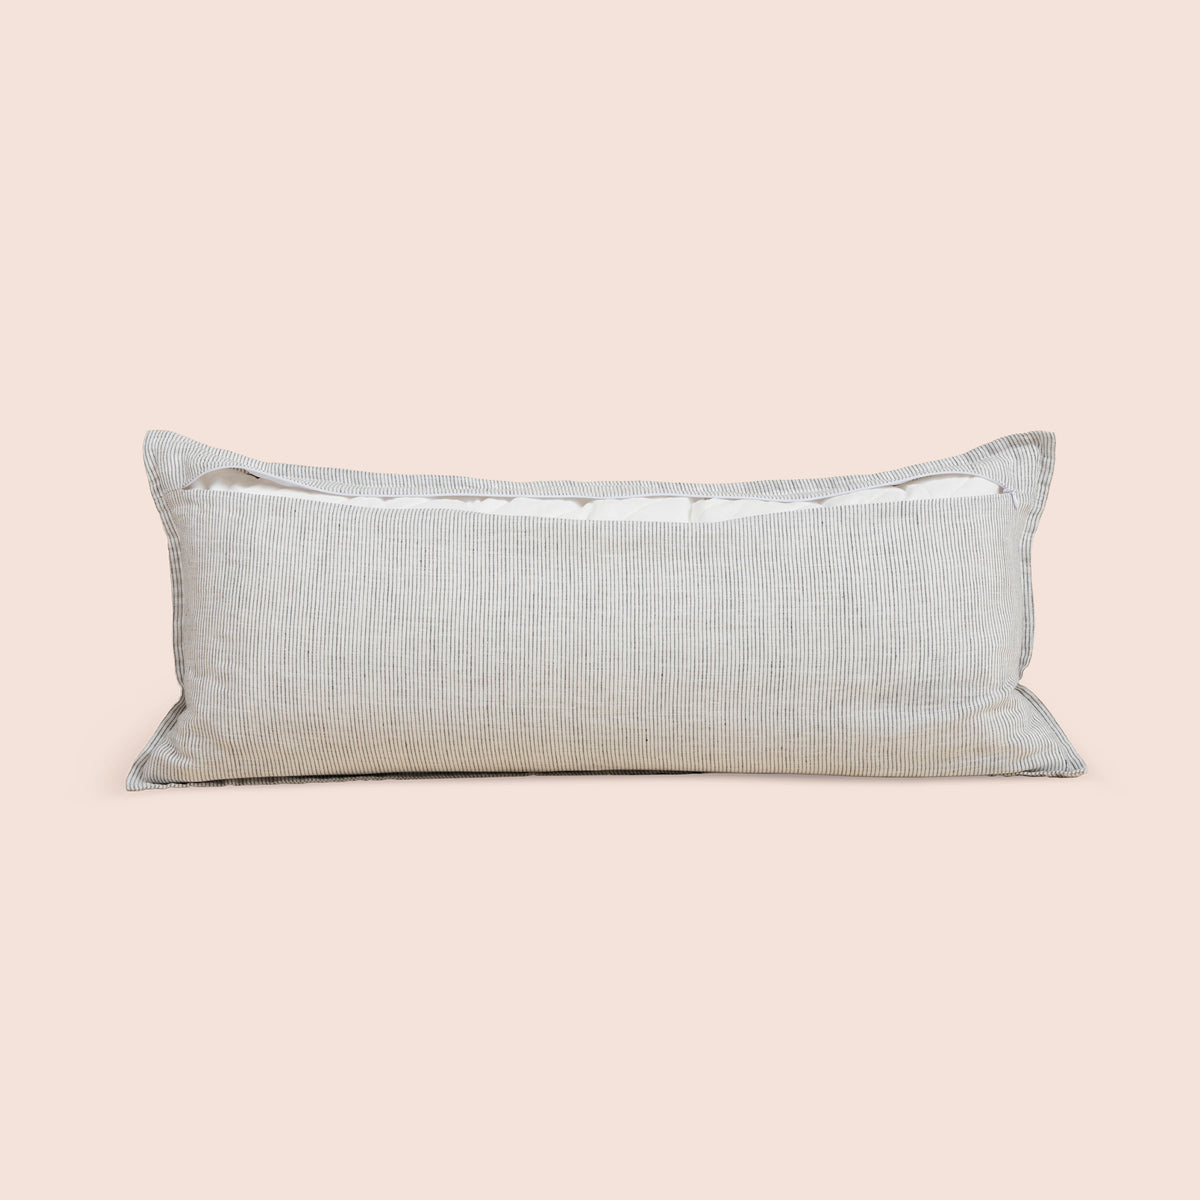 Image of the back of the Pinstripe Relaxed Hemp Lumbar Pillow Cover on a lumbar pillow with the back zipper open on a light pink background